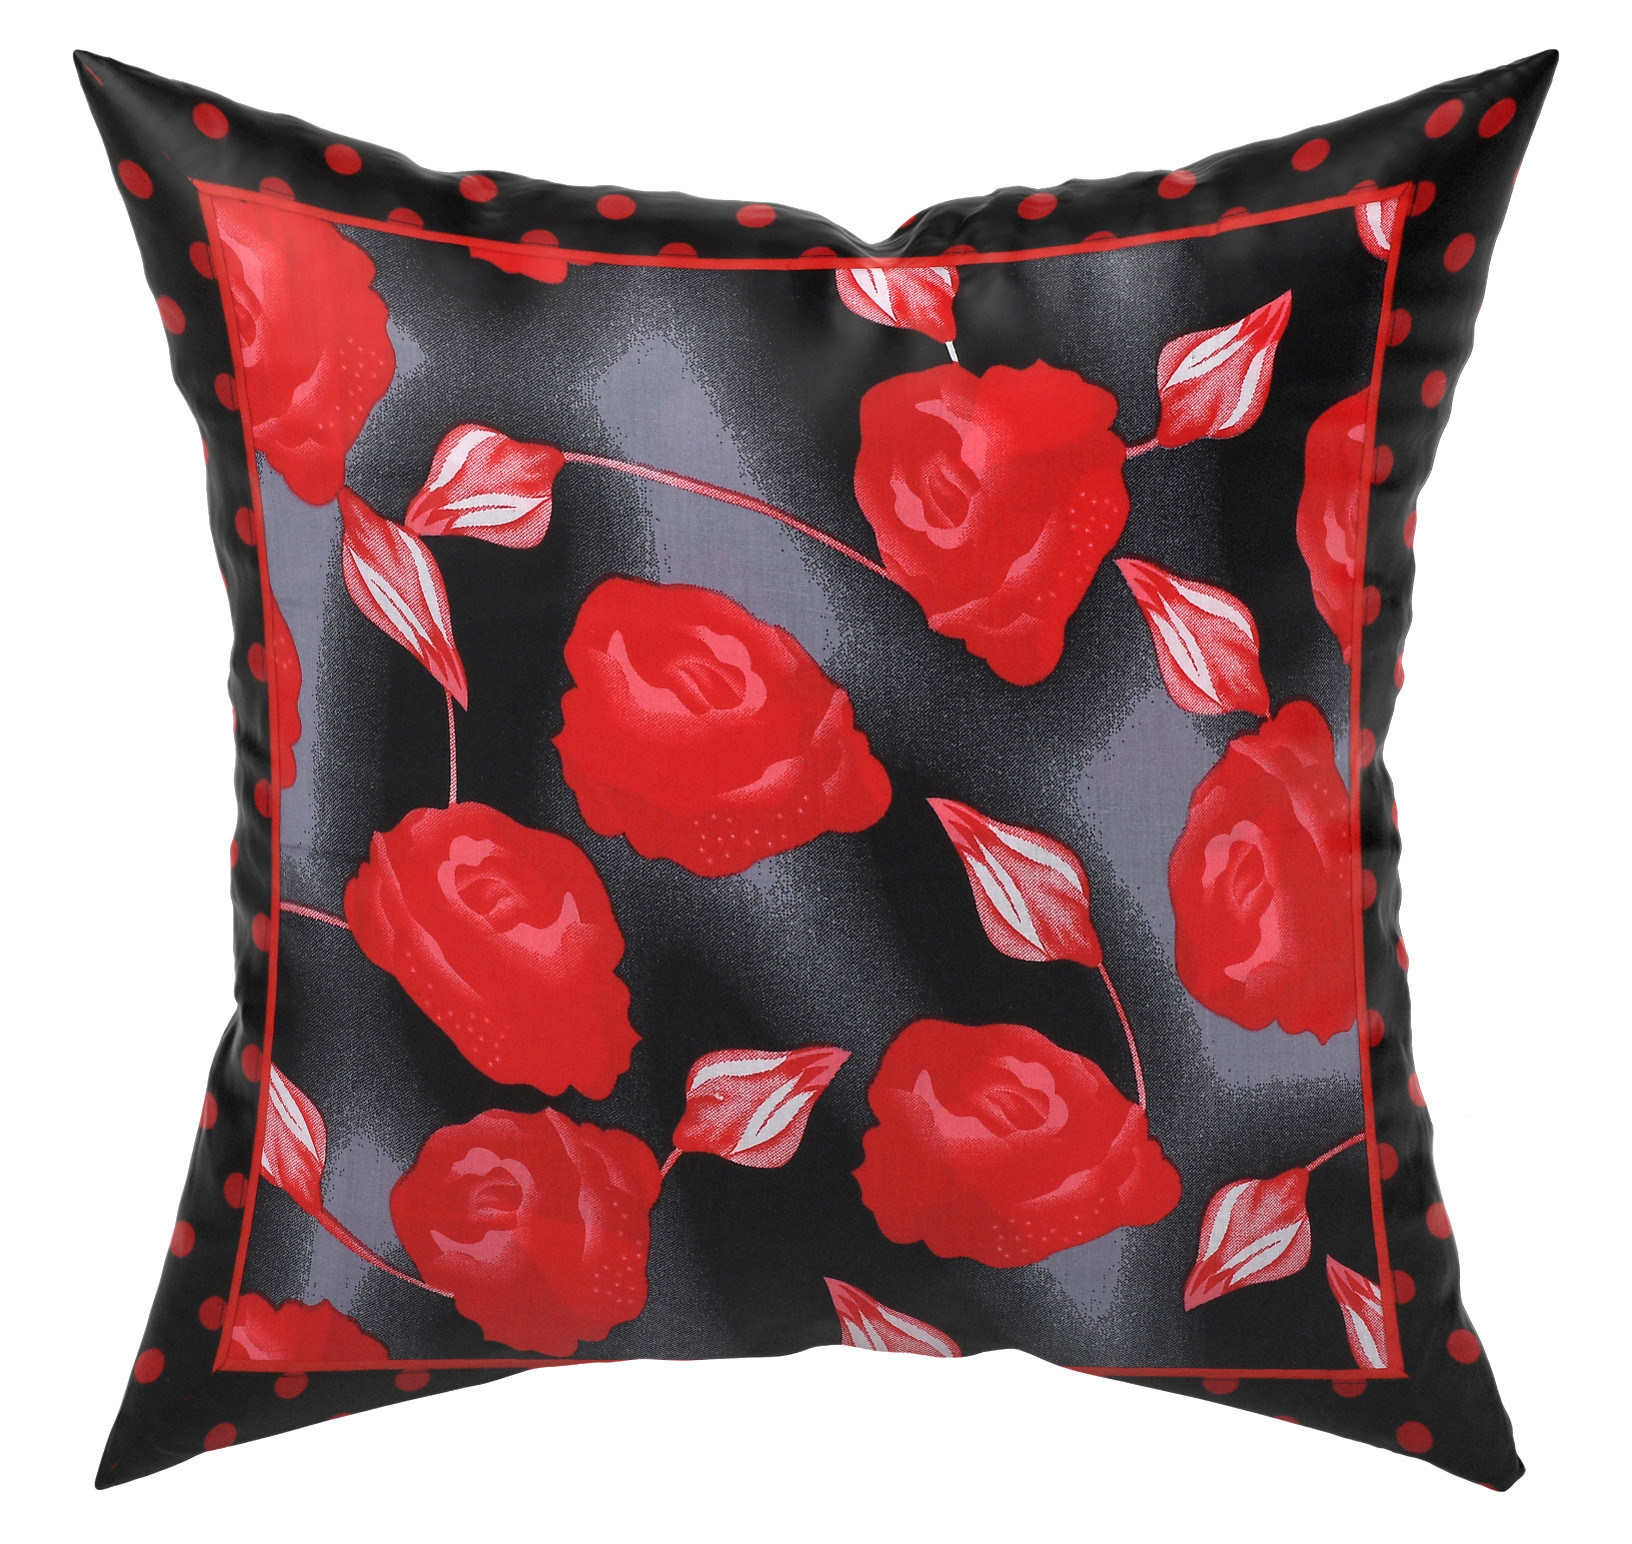 Kuber Industries Flower Print Cotton Abstract Decorative Throw Pillow/Cushion Covers 16